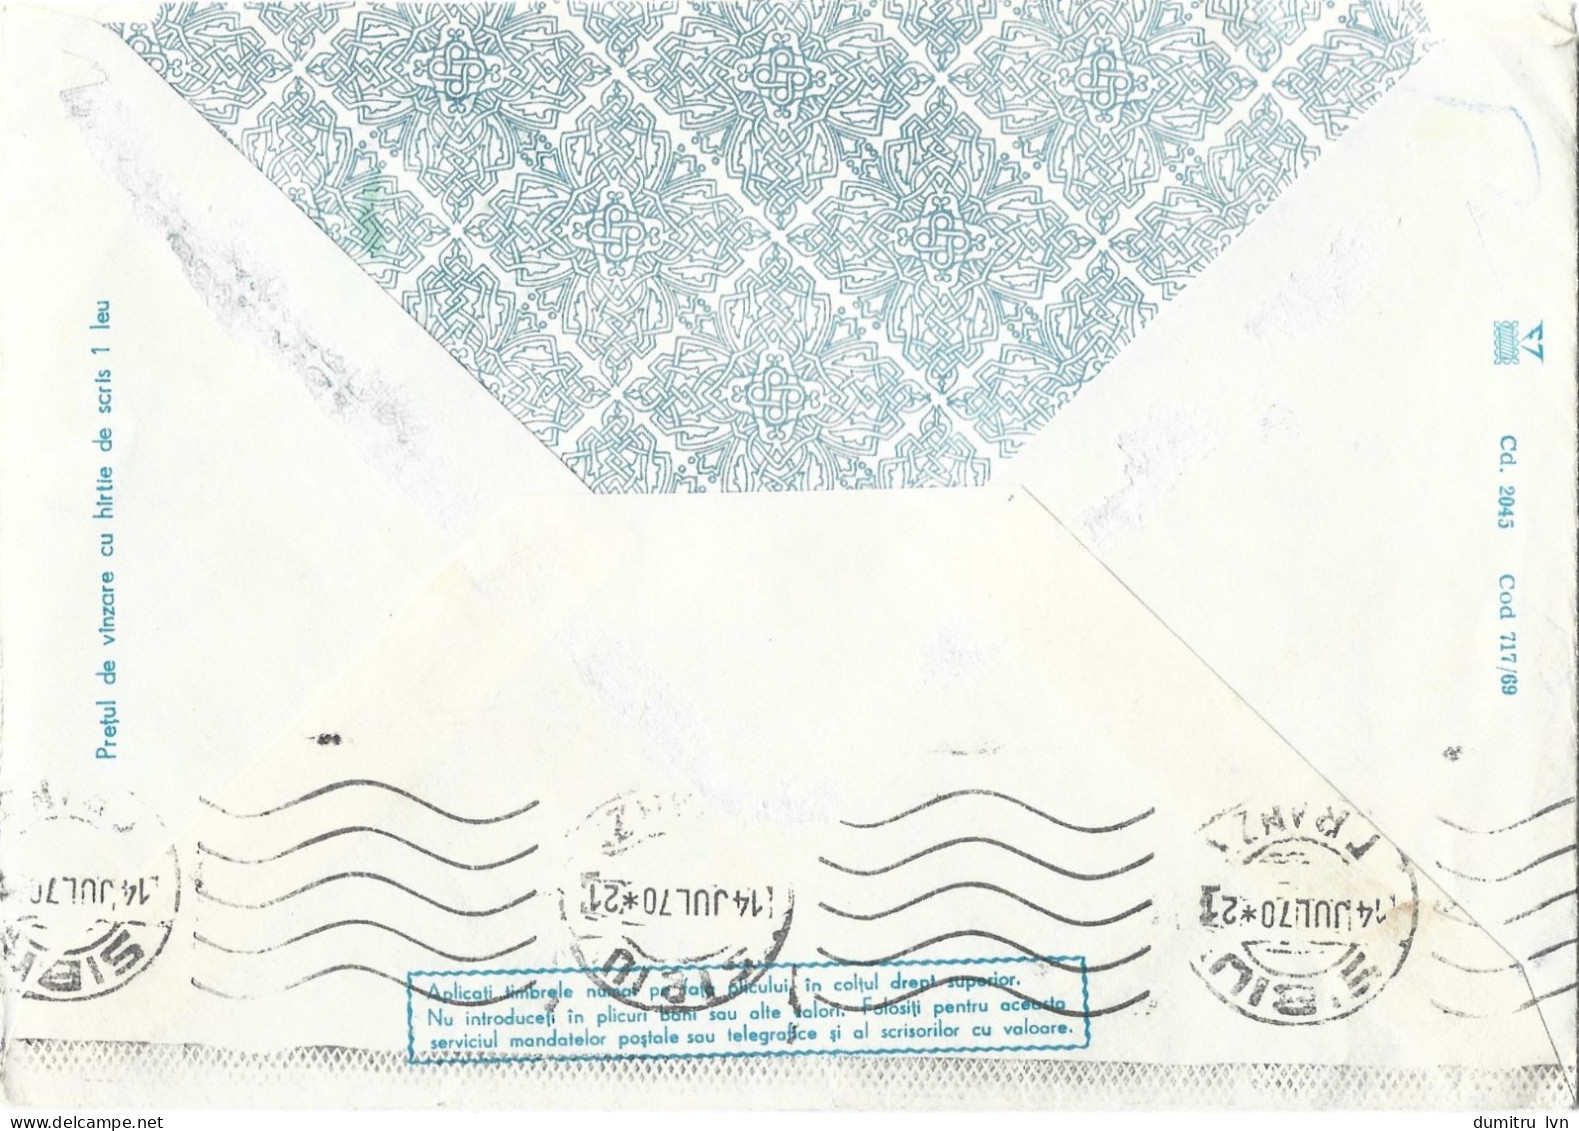 ROMANIA 1969 WINTER LANDSCAPE, SKIERS, CIRCULATED ENVELOPE, COVER STATIONERY - Entiers Postaux